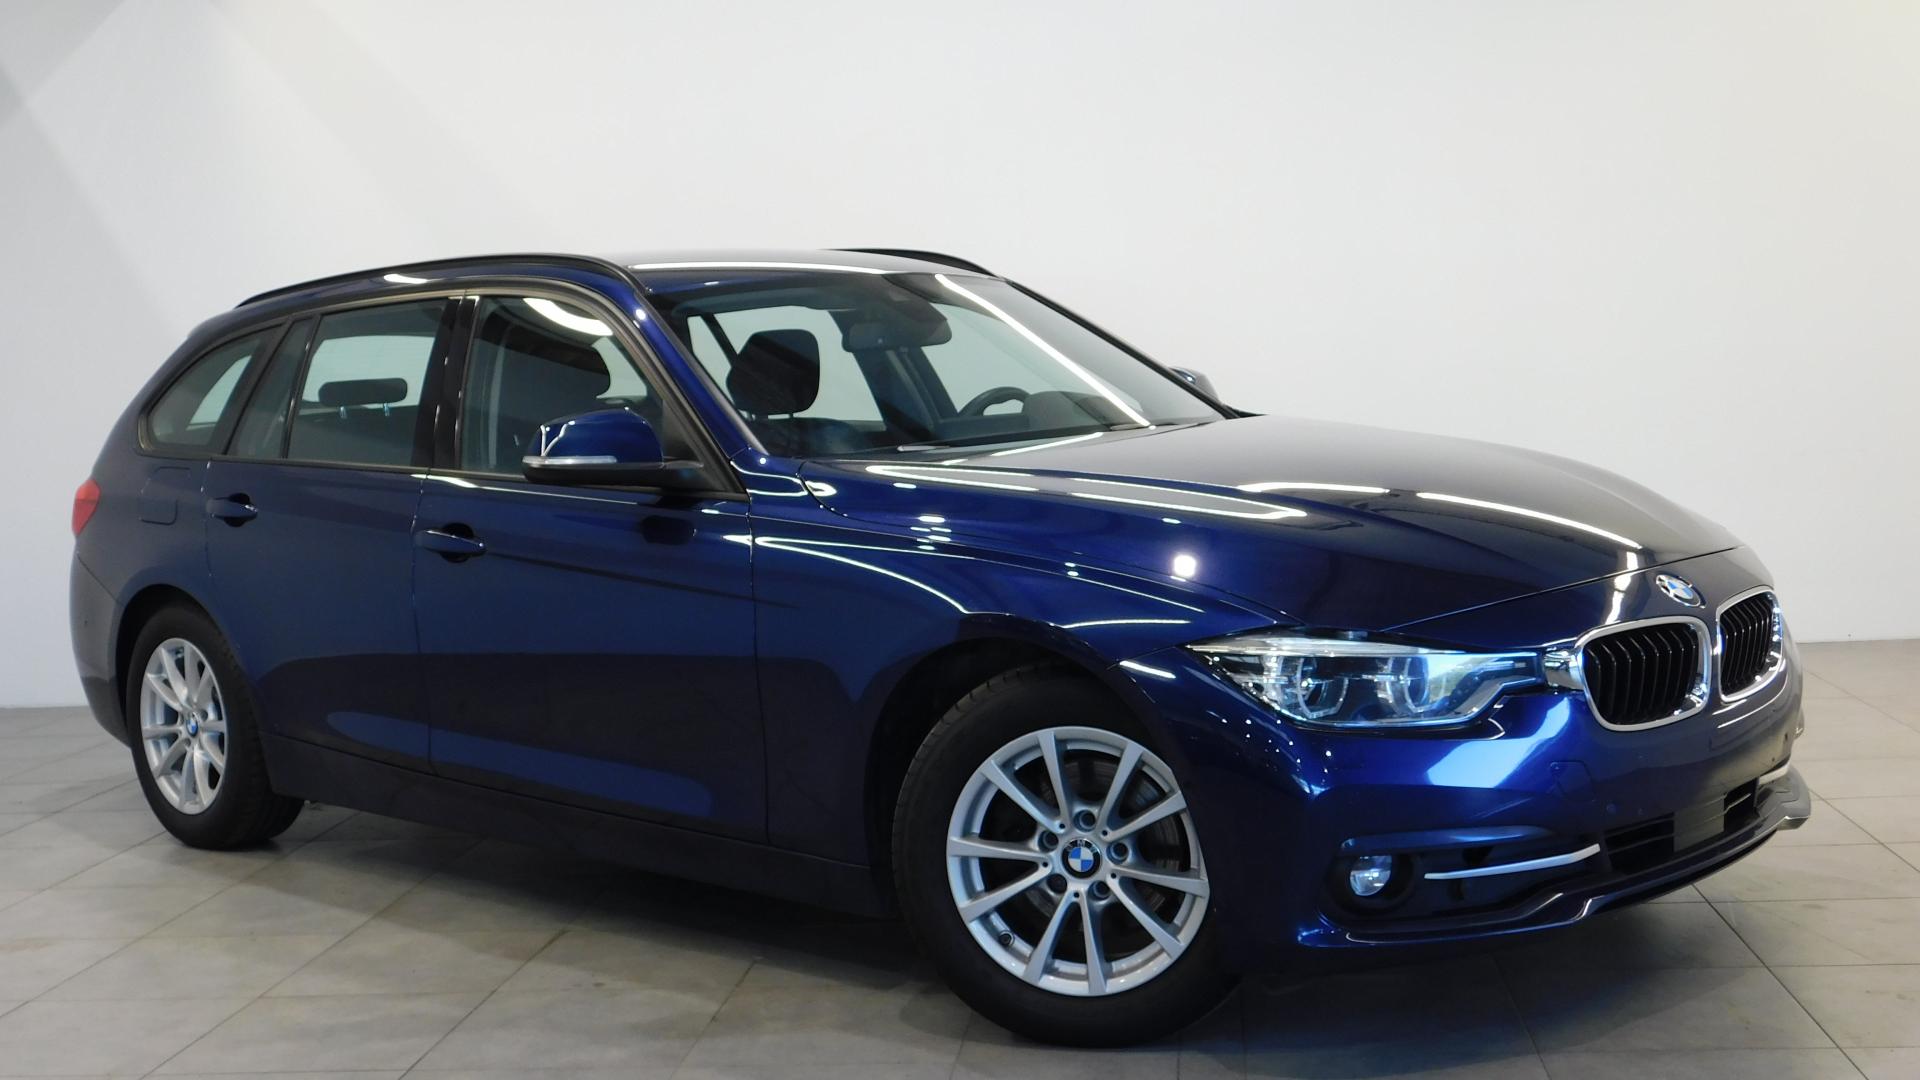 BMW SERIE 3 320d EfficientDynamics Touring Sport Ultimate - BVA  TOURING F31 LCI 320d PHASE 2